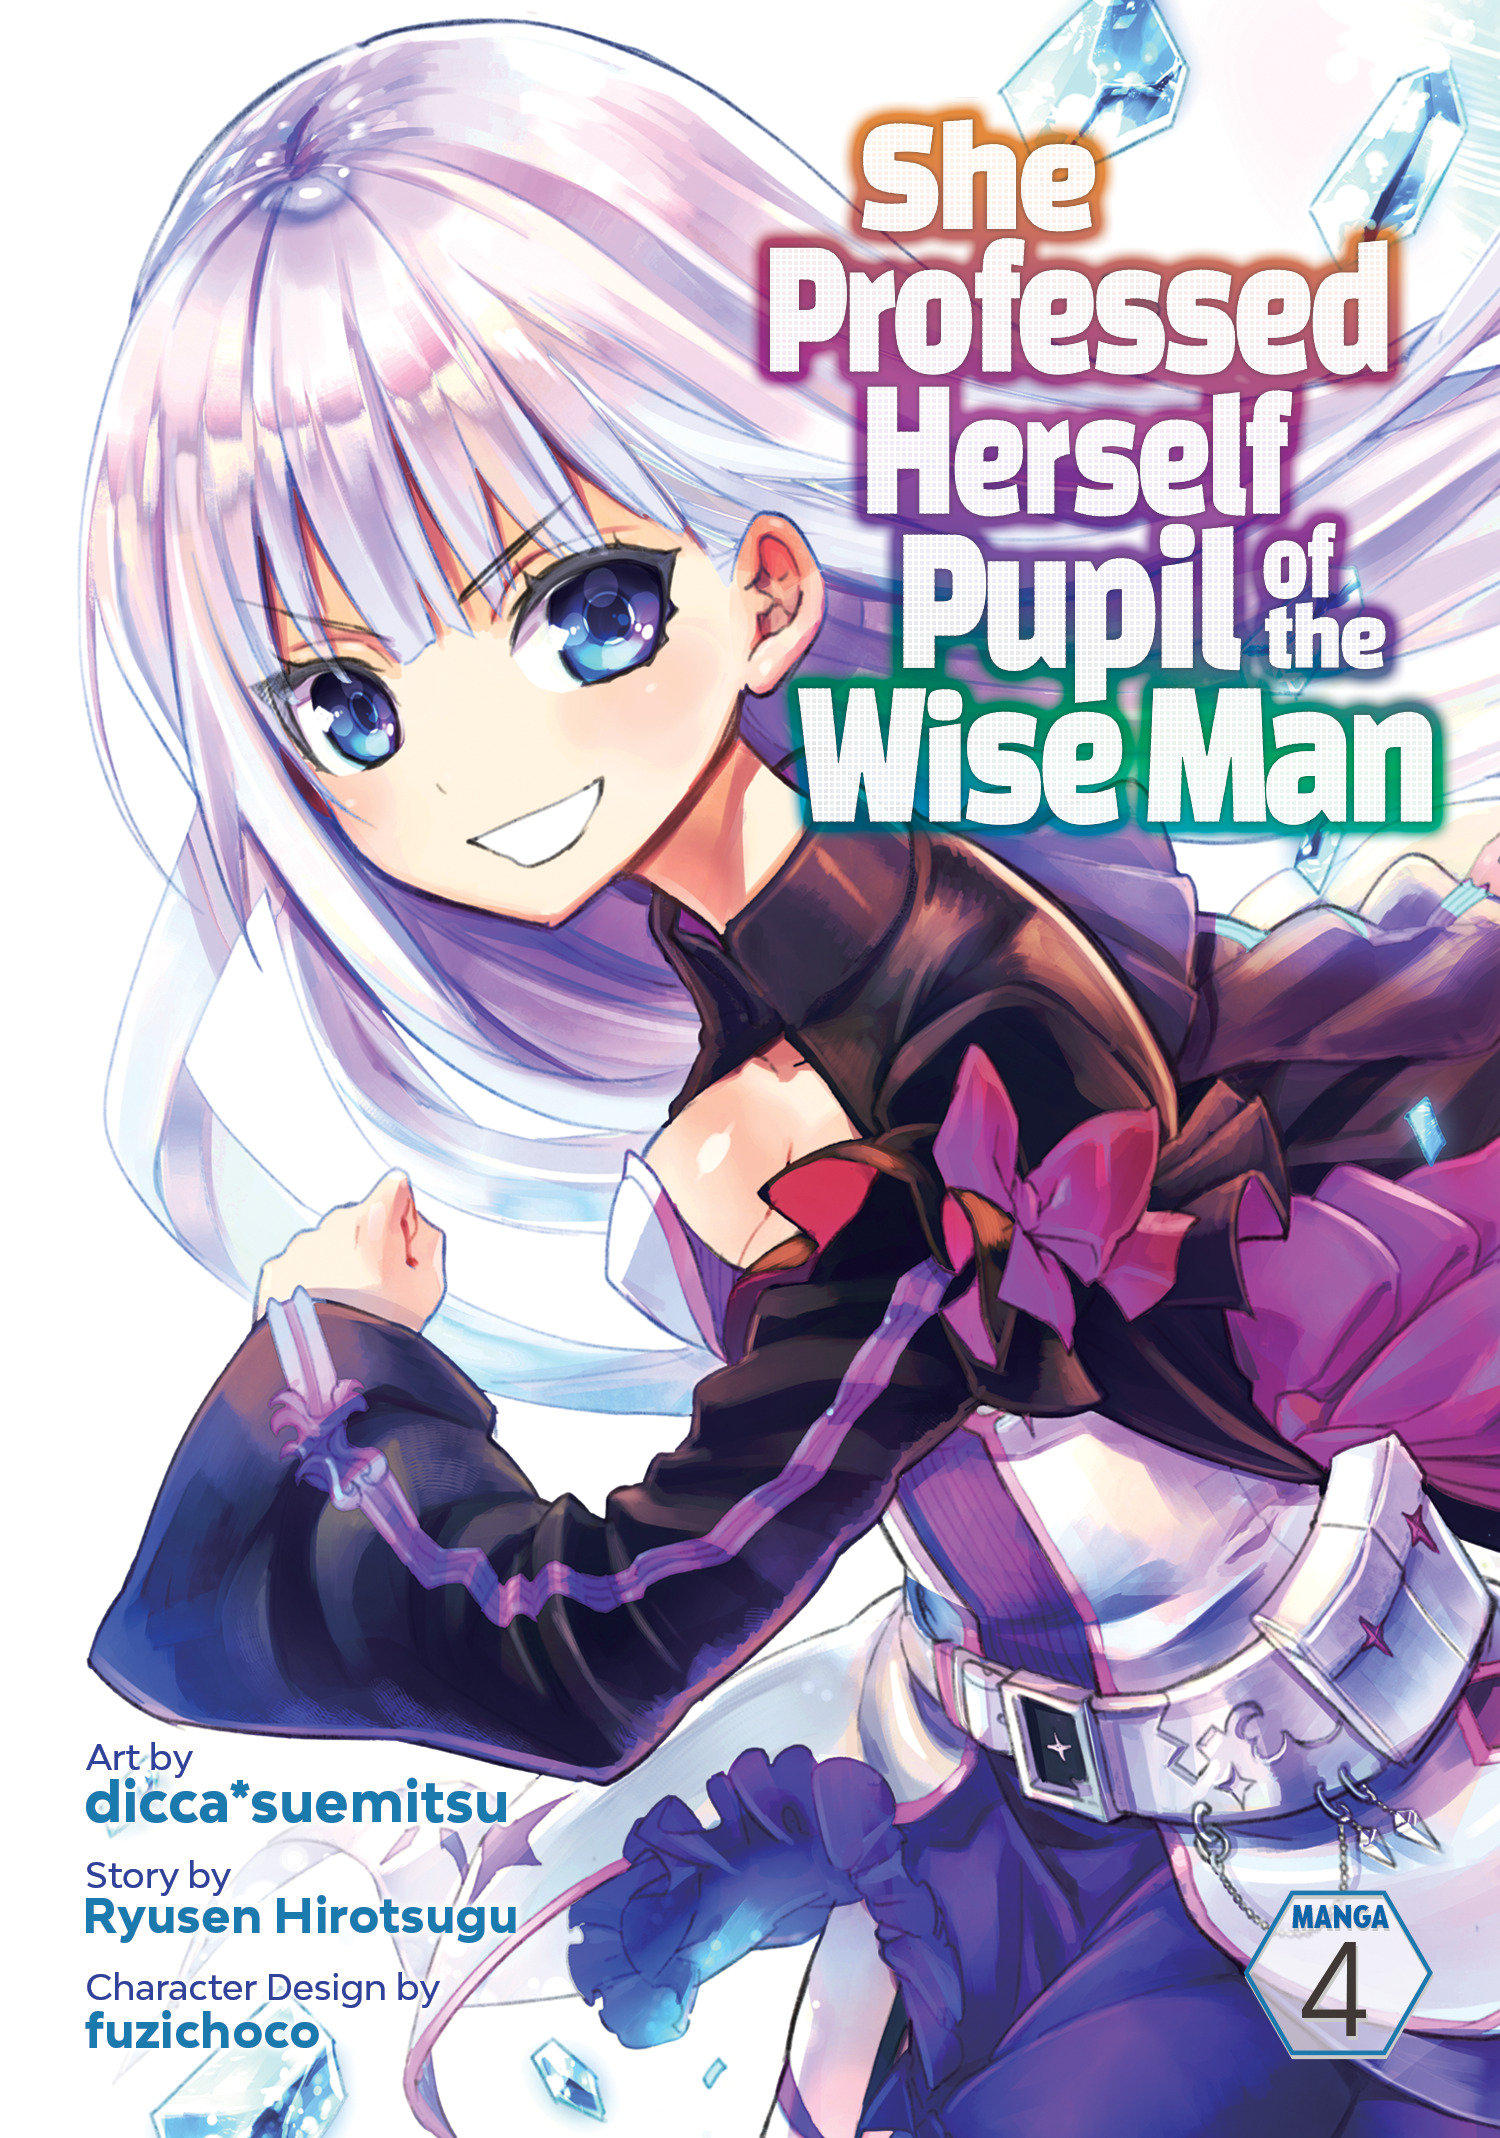 She Professed Herself Pupil of the Wise Man Manga Volume 4